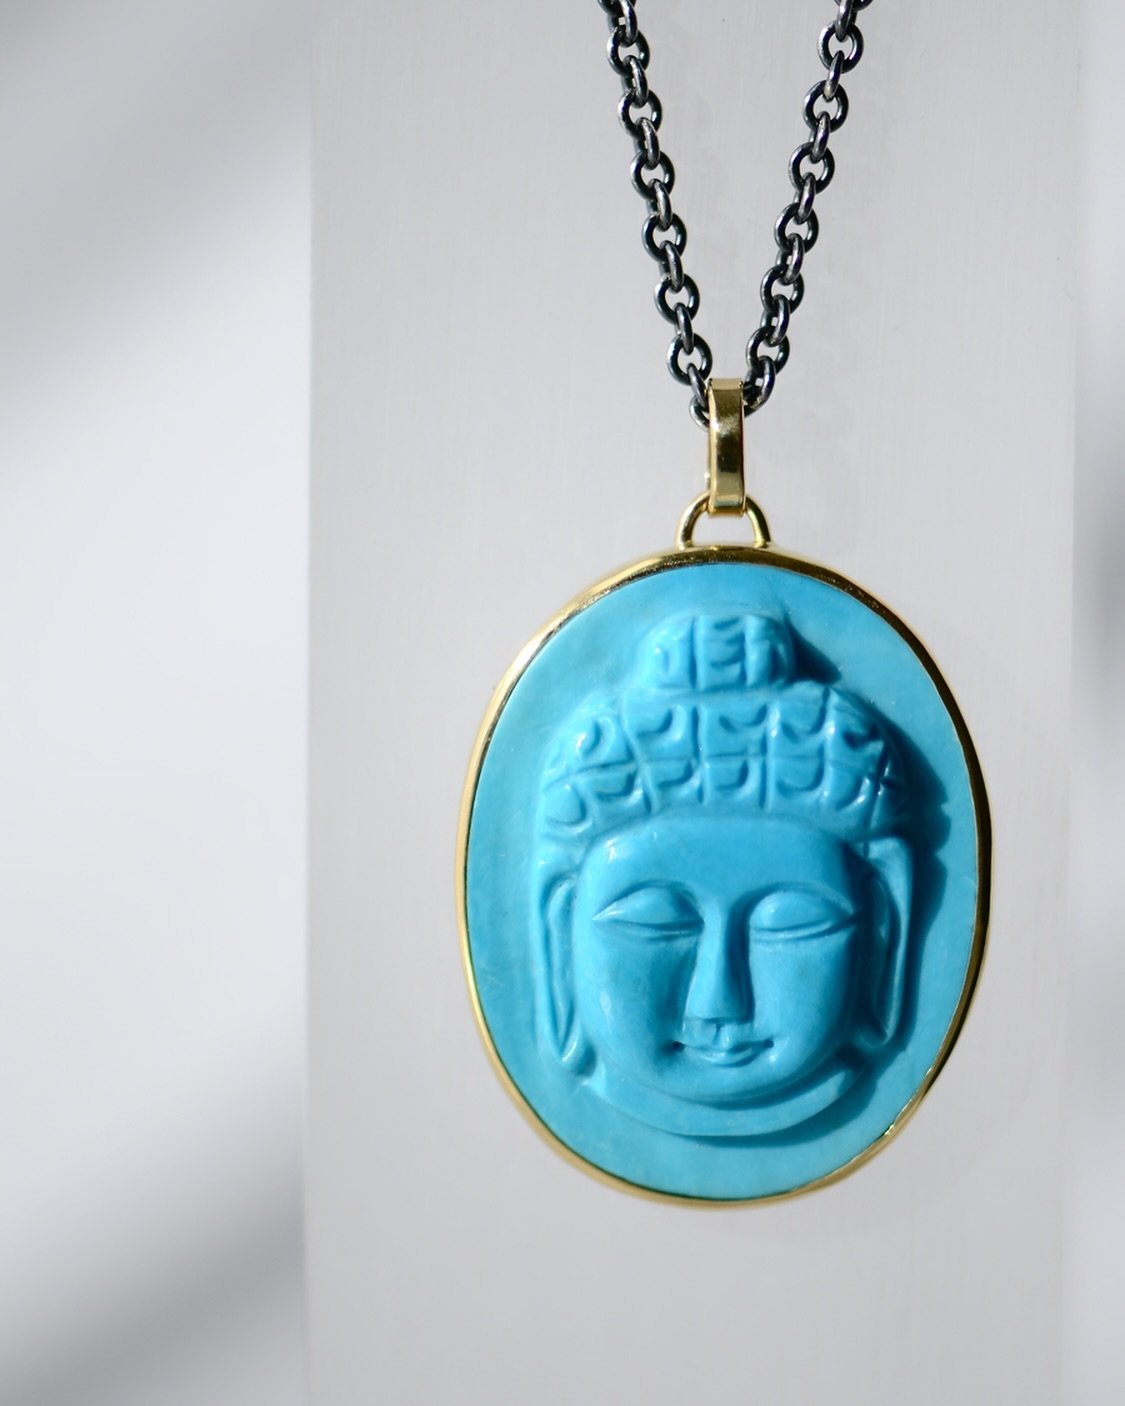 Calm-inducing. 

After a long month of traveling and art shows in the south, I call on all the soothing energies from this one of a kind fabulous pendant. 

Buddha&rsquo;s face carved in Turquoise.
Find it online at www.zetaleonis.com 
Elevate your s